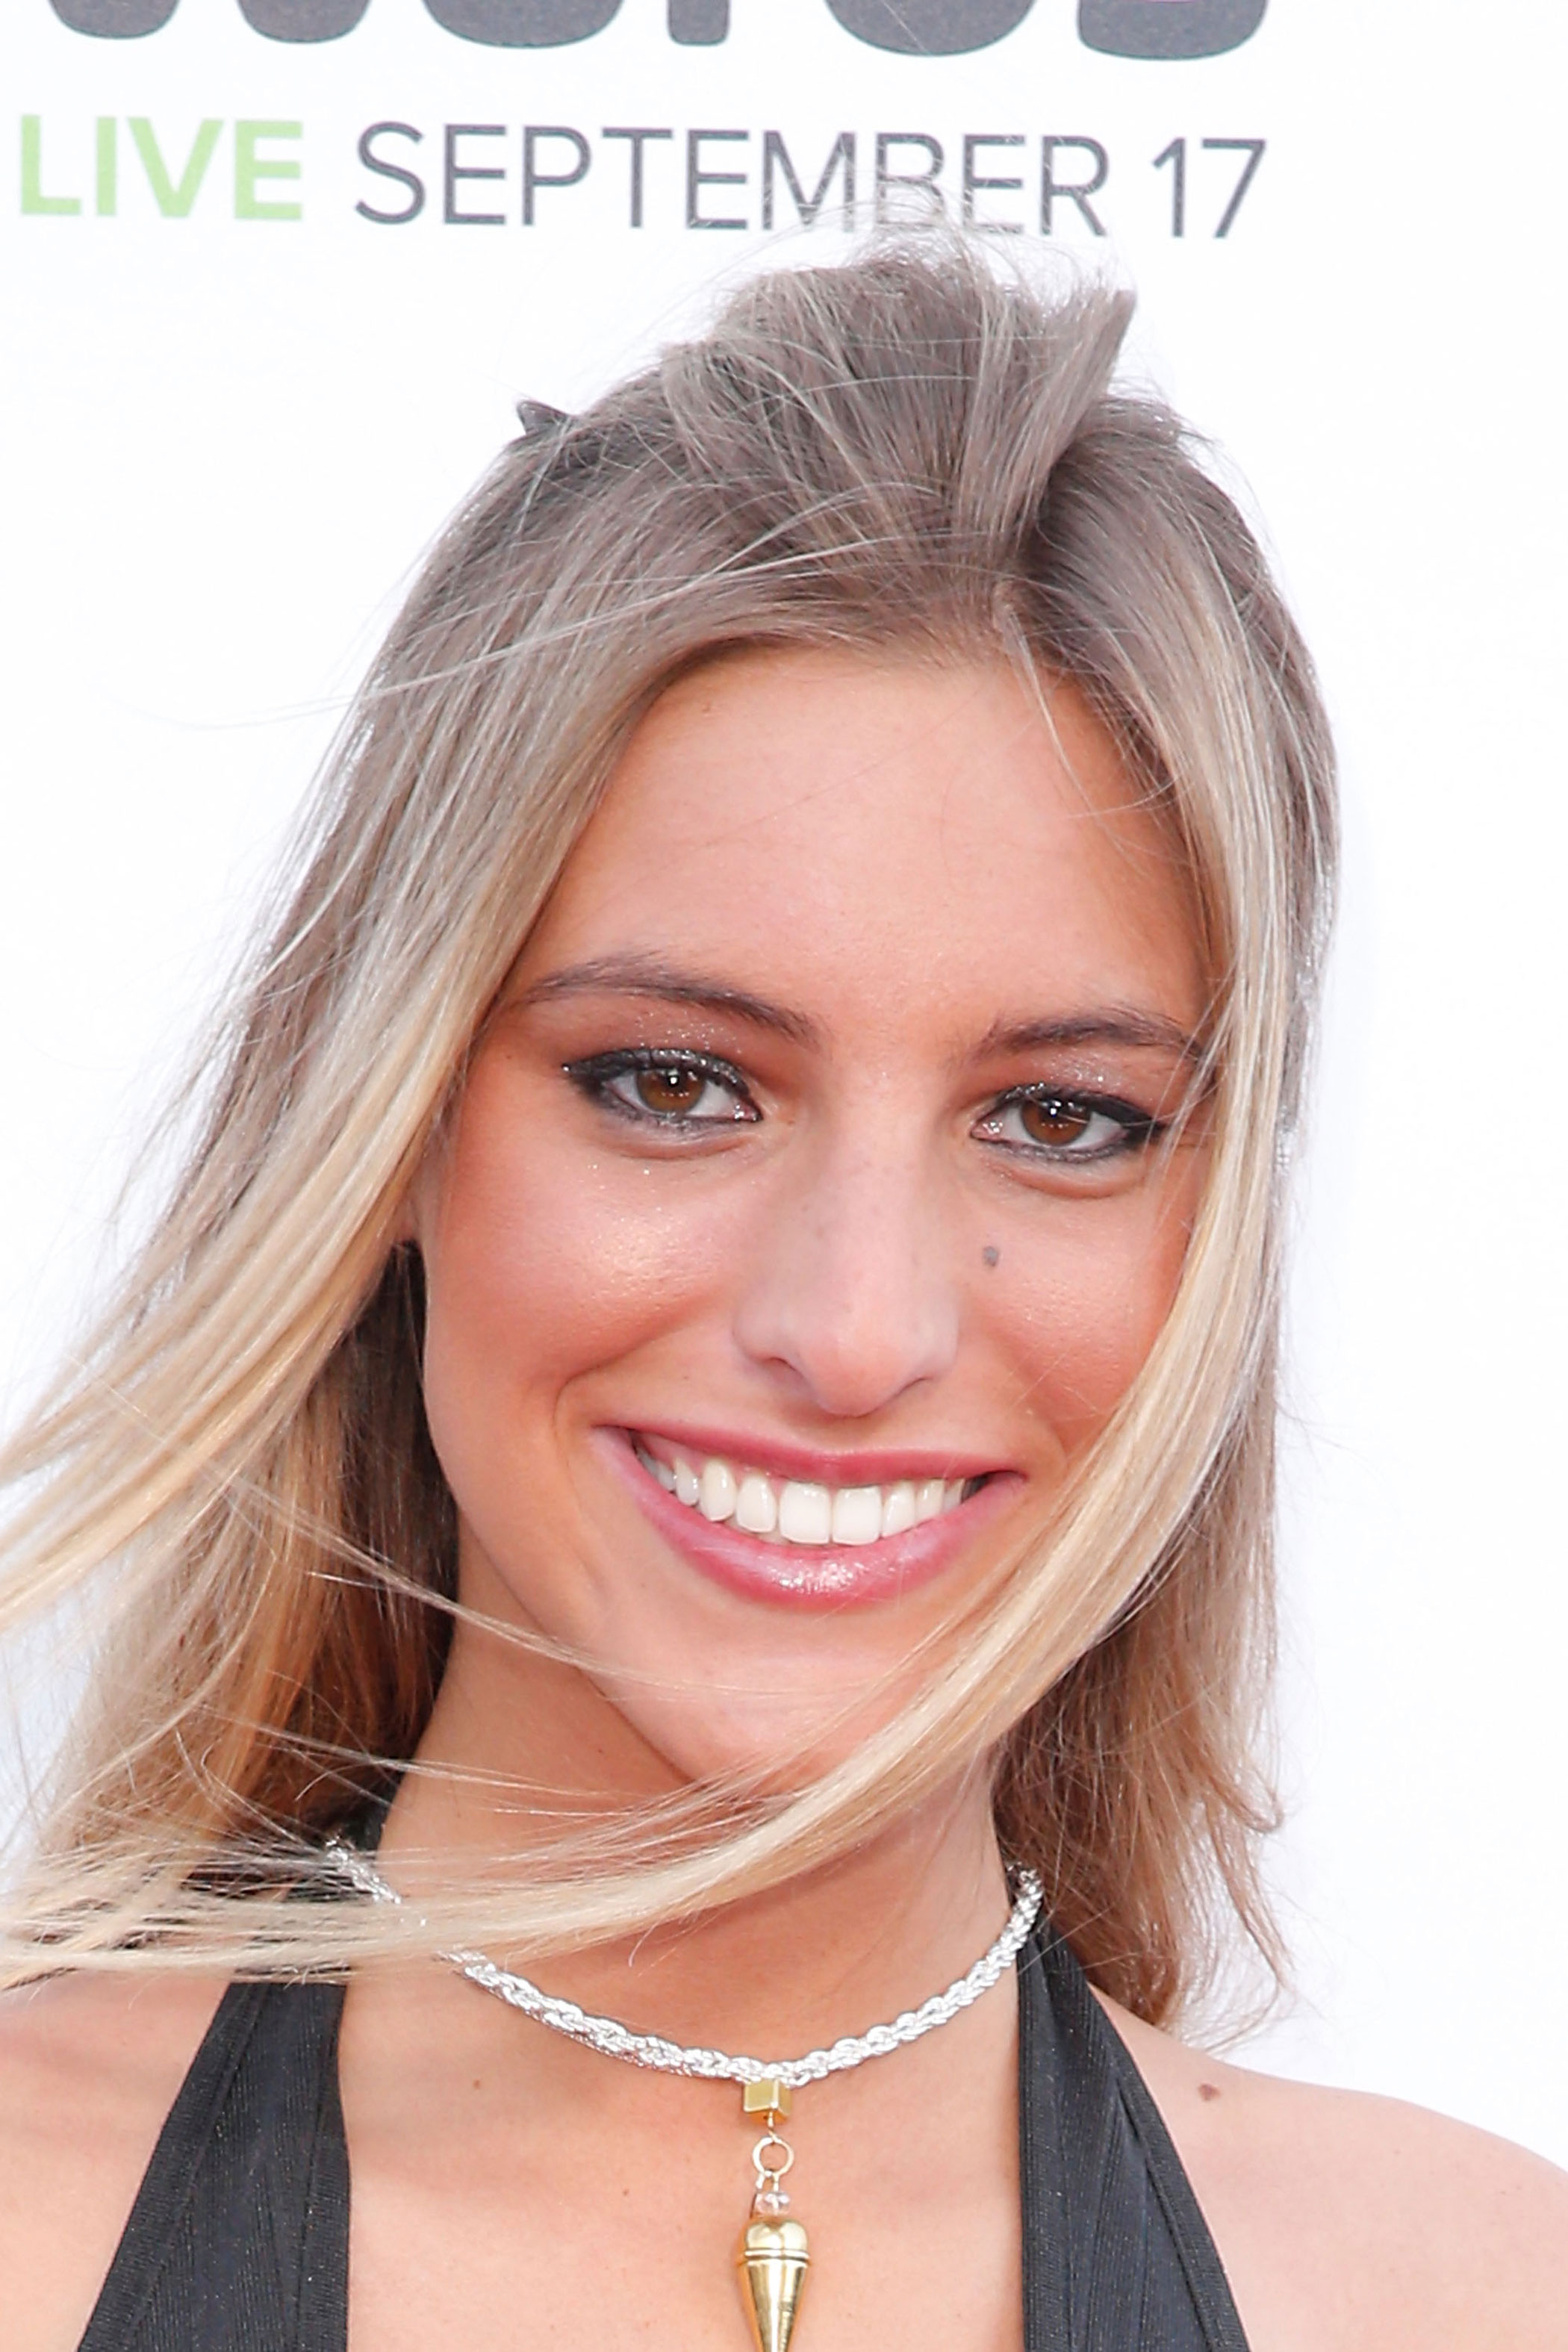 Most Influential Teens 2015 Lele Pons